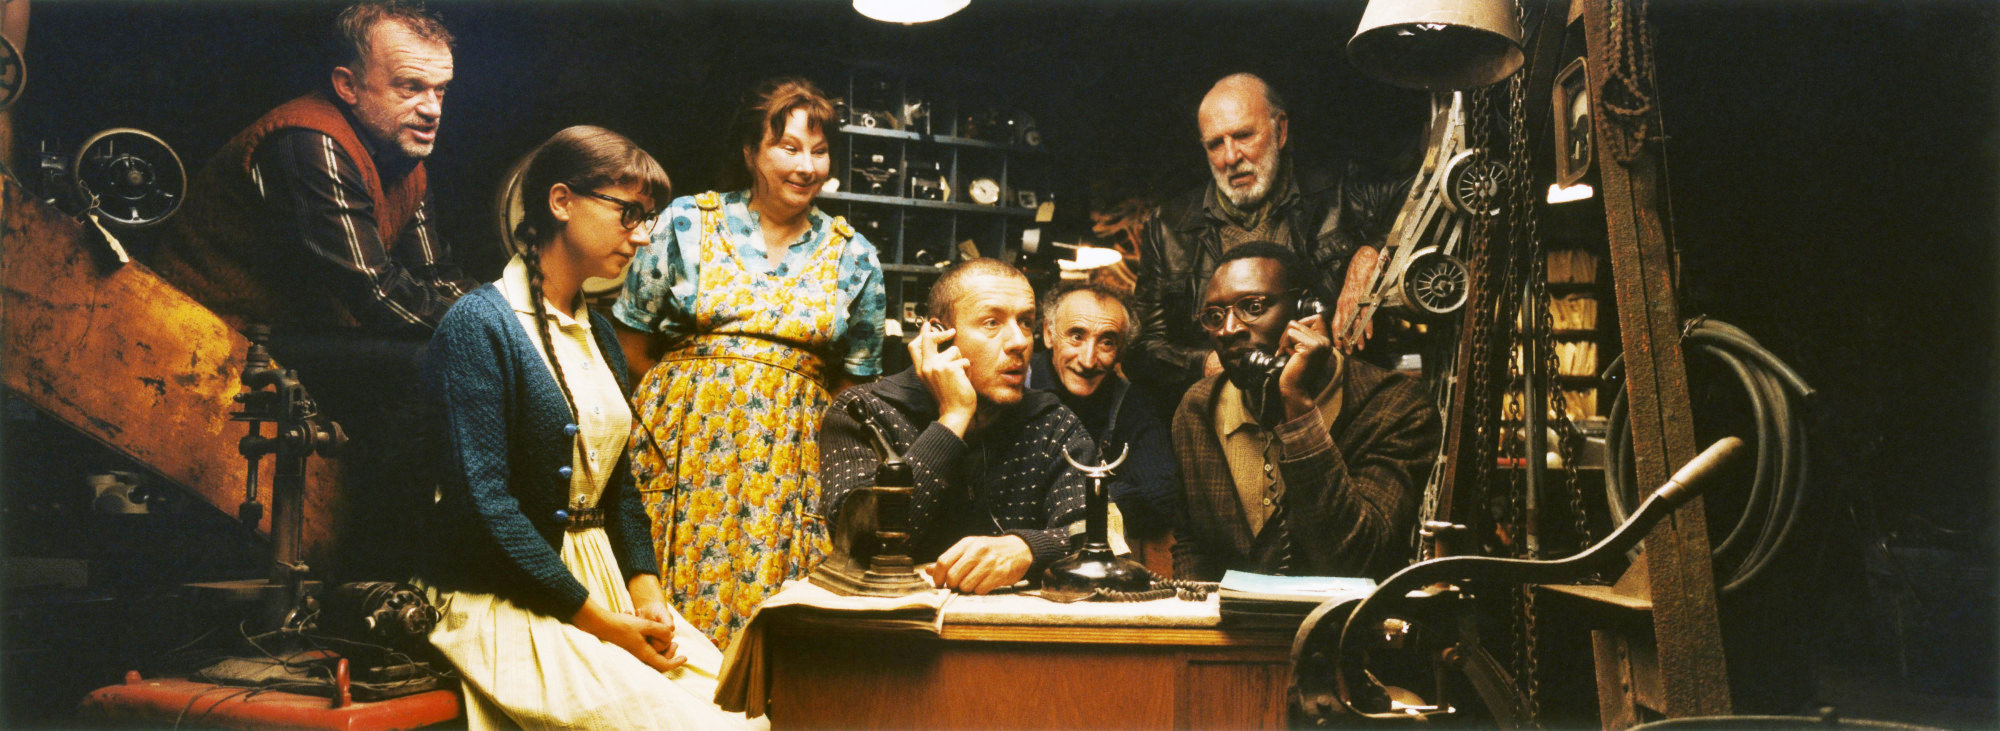 Dominique Pinon, Marie-Julie Baup, Yolande Moreau, Dany Boon, Michel Cremades, Jean-Pierre Marielle and Omar Sy in Sony Pictures Classics' Micmacs (2010)